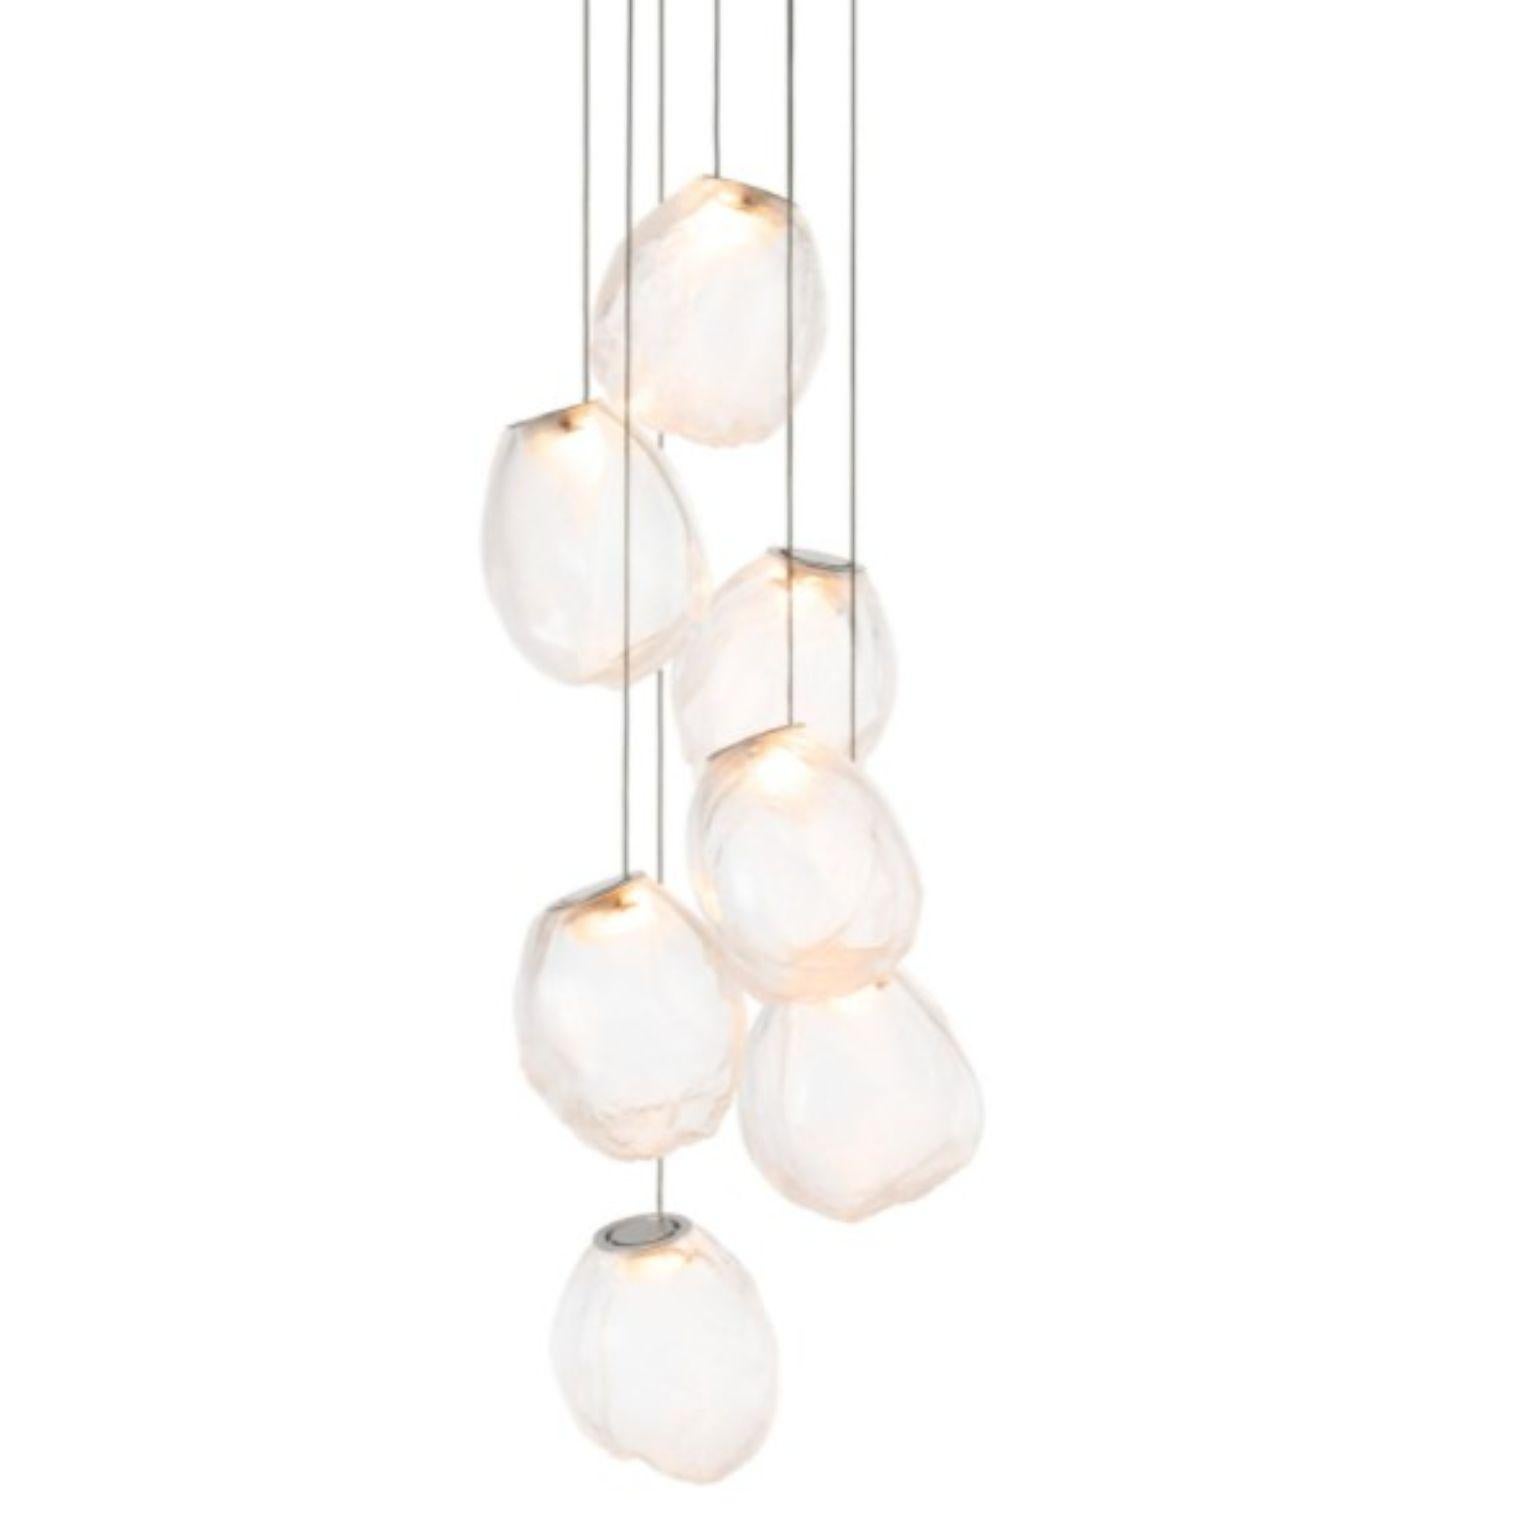 73.7 Pendant by Bocci
Dimensions: D20.3 x H300 cm
Materials: brushed nickel round canopy
Weight: 21 kg
Also available in different dimensions and colours.
All our lamps can be wired according to each country. If sold to the USA it will be wired